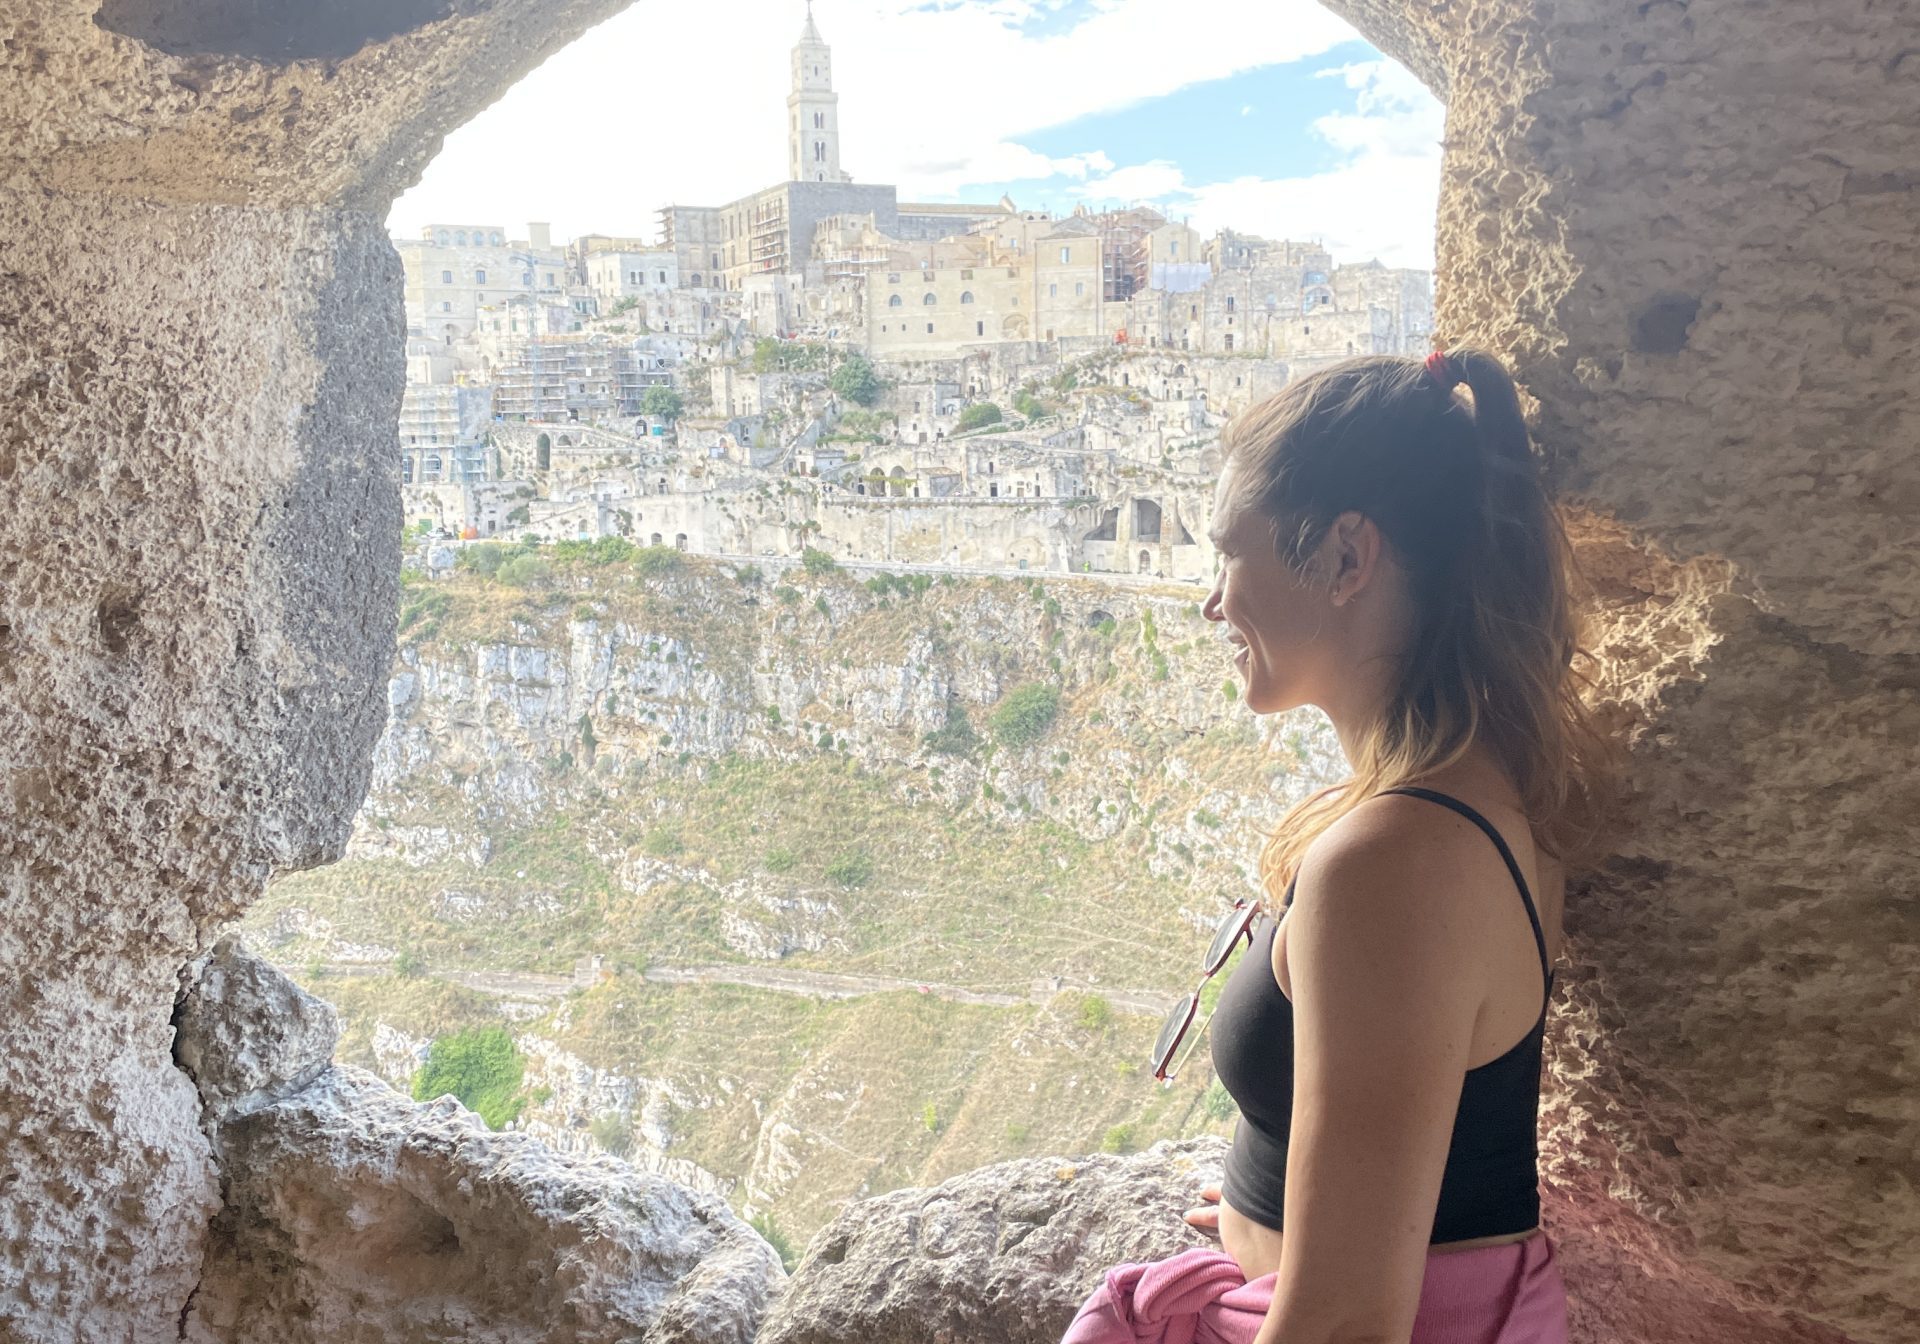 me looking out over Matera thinking about 10 years in italy